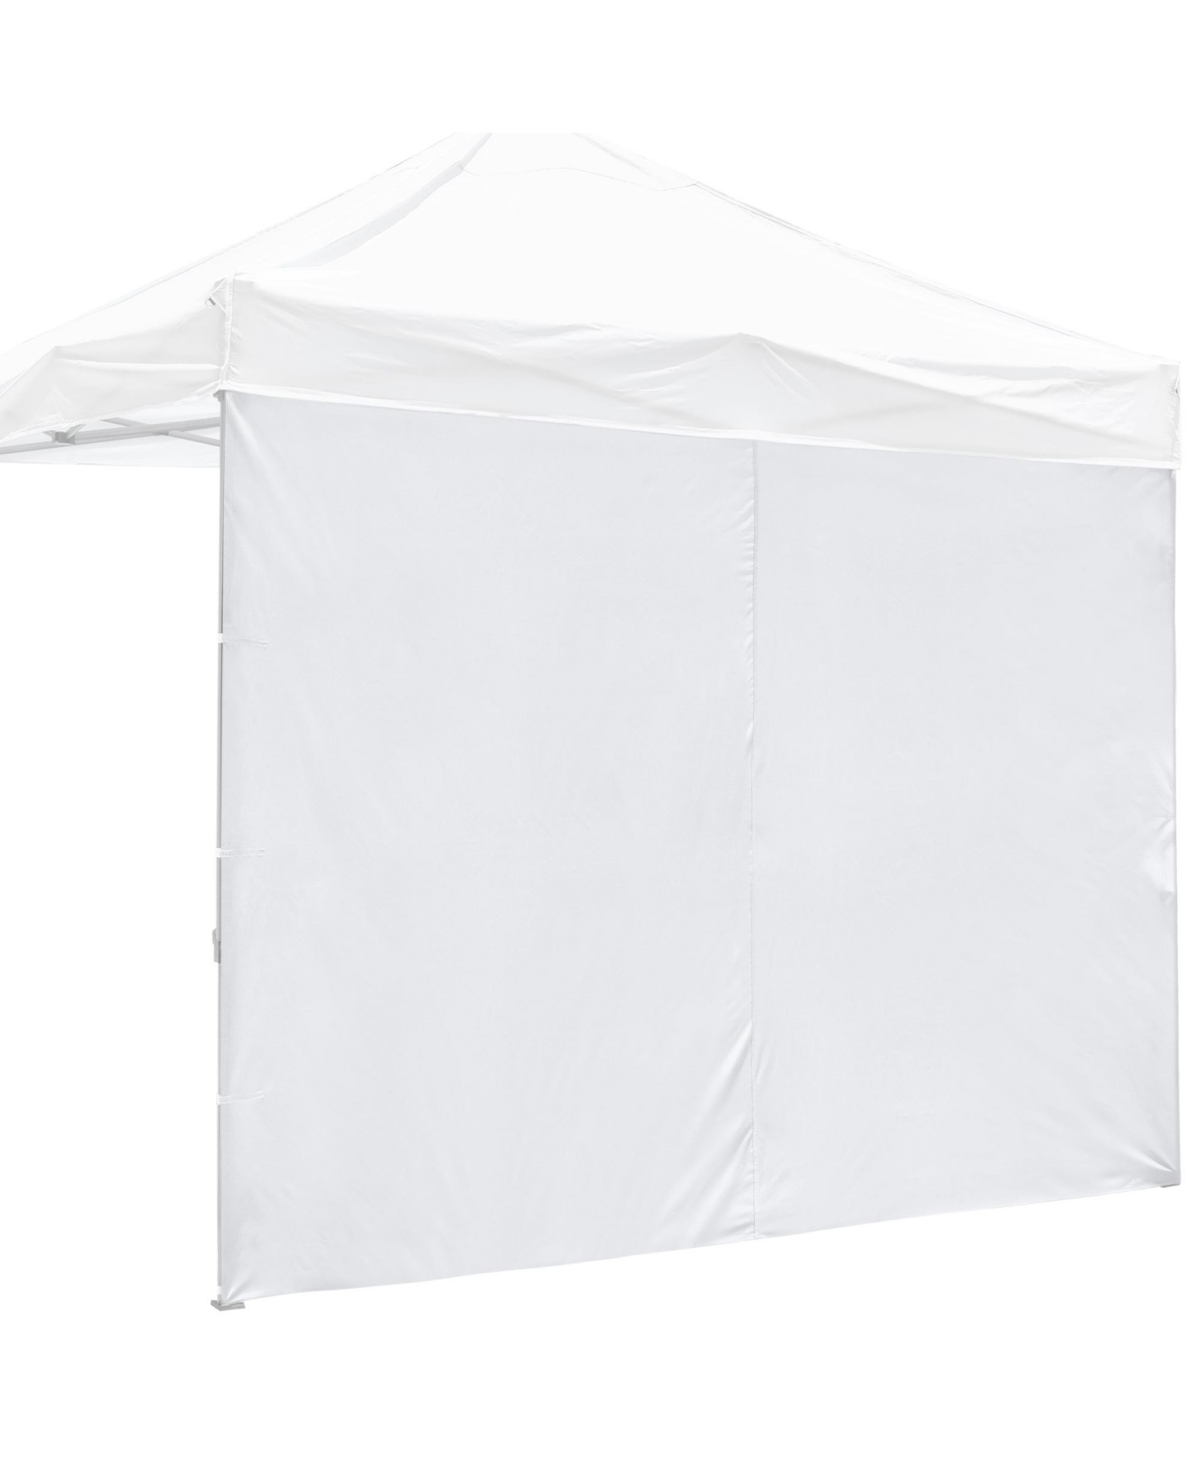 Sidewall UV30+ Fits 10x10ft Canopy Outdoor Picnic 1 Piece Picnic - Natural